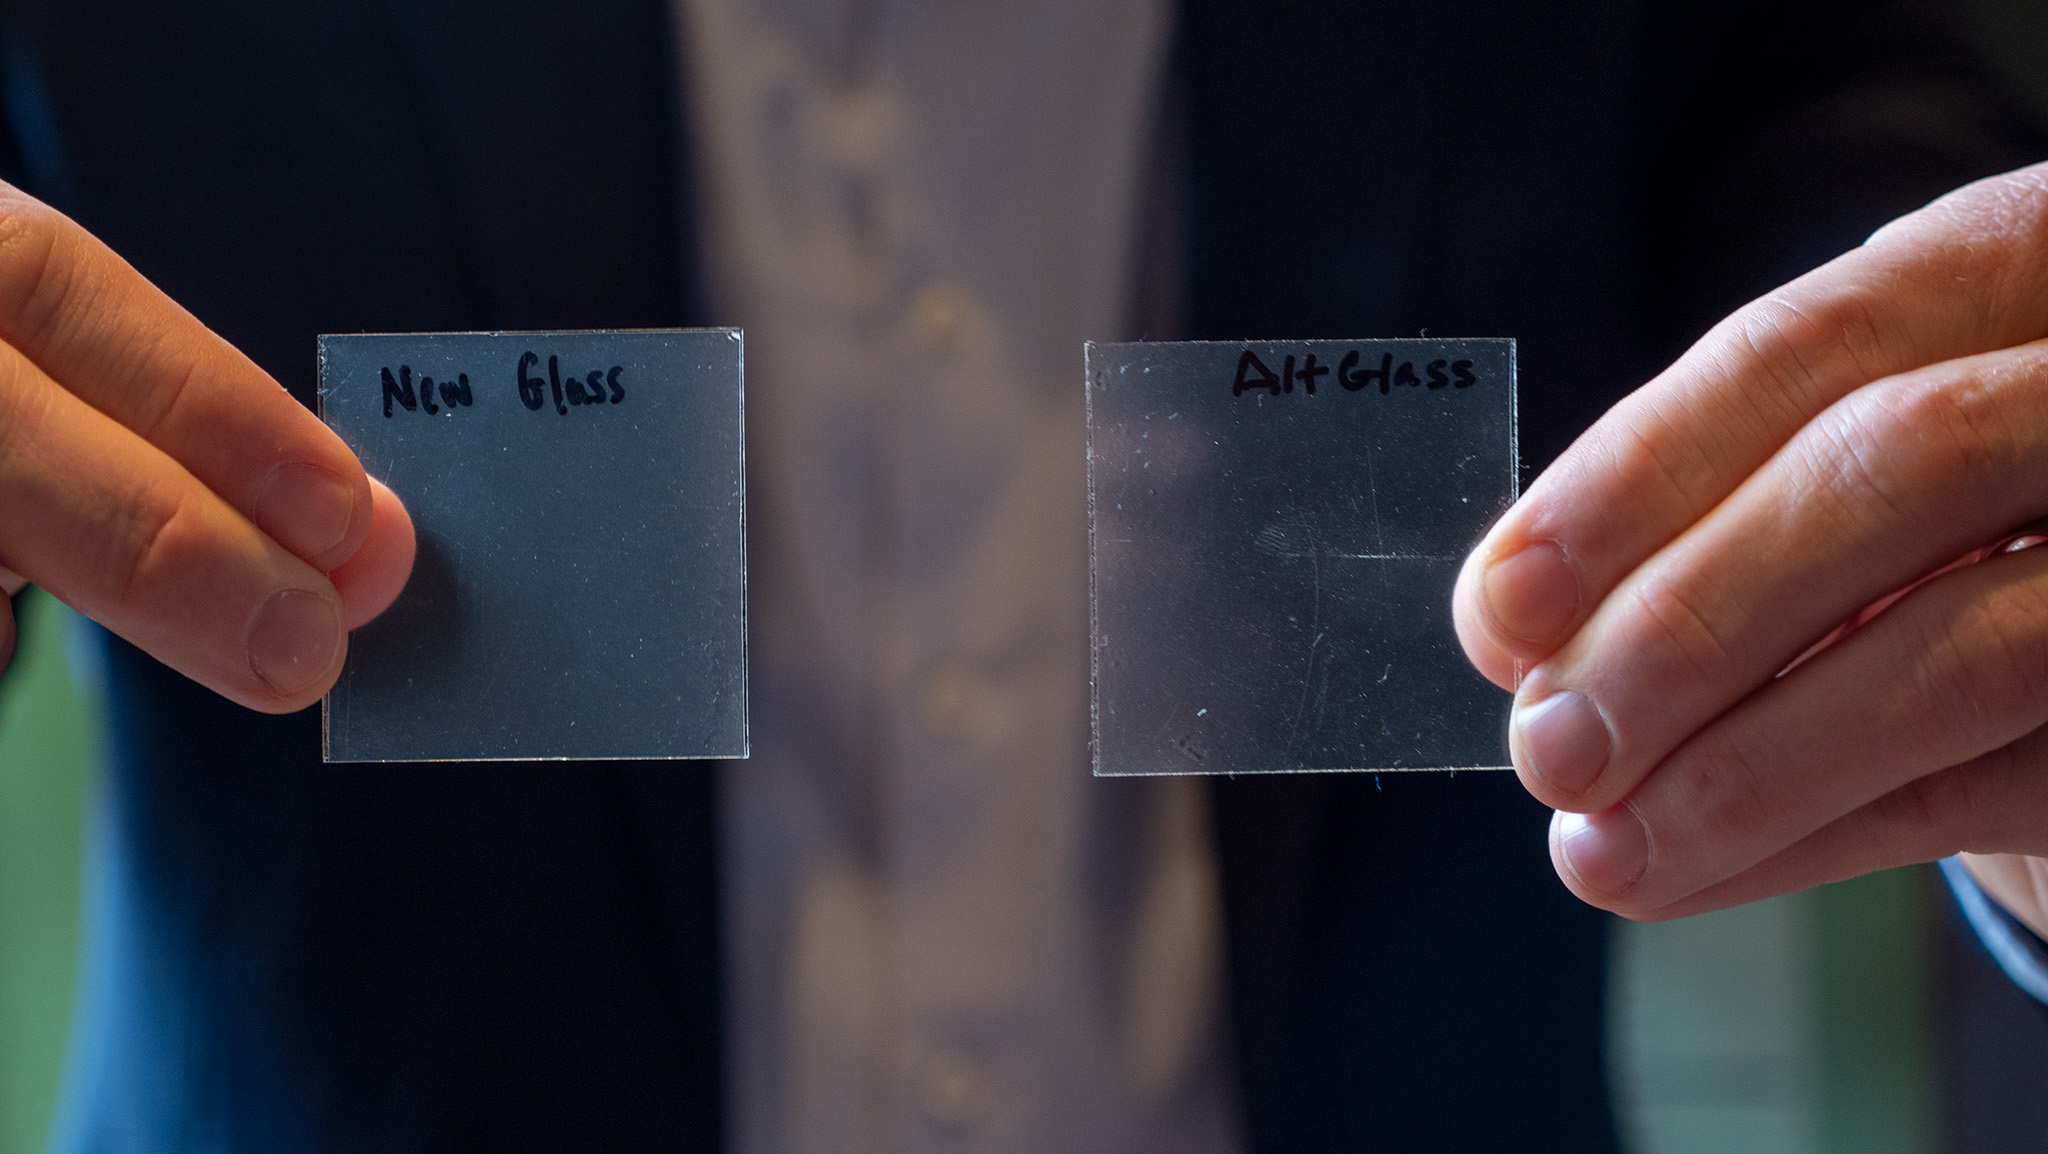 Motorola's MWC display of how scratch resistant Gorilla Glass Victus 2 is versus the previous generation glass